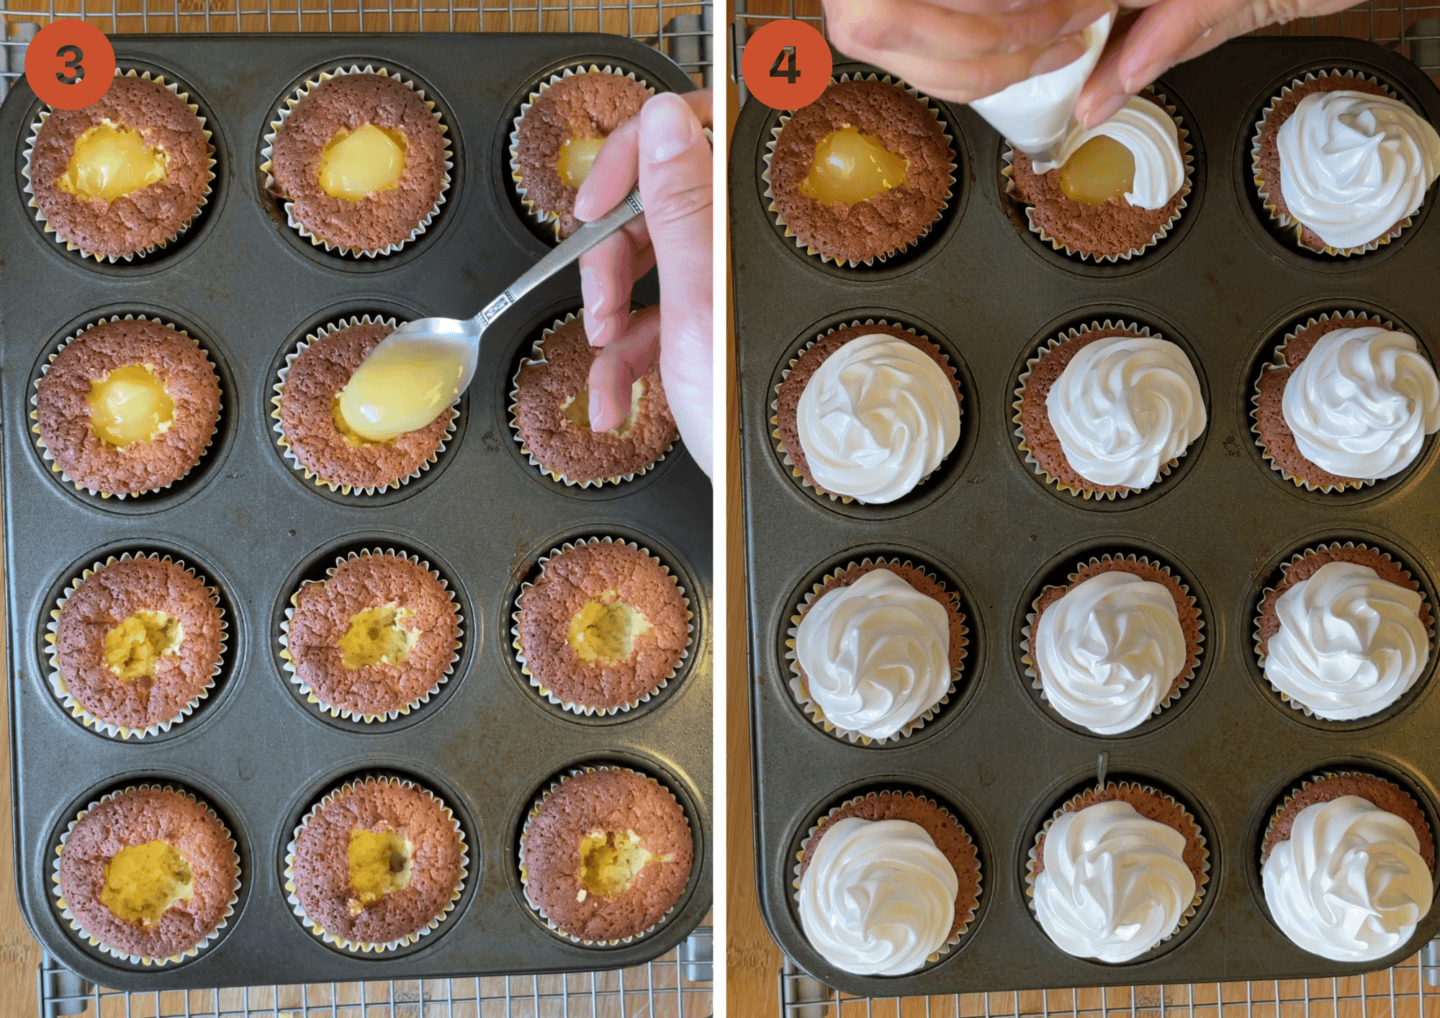 Filling and topping the lemon meringue cupcakes.